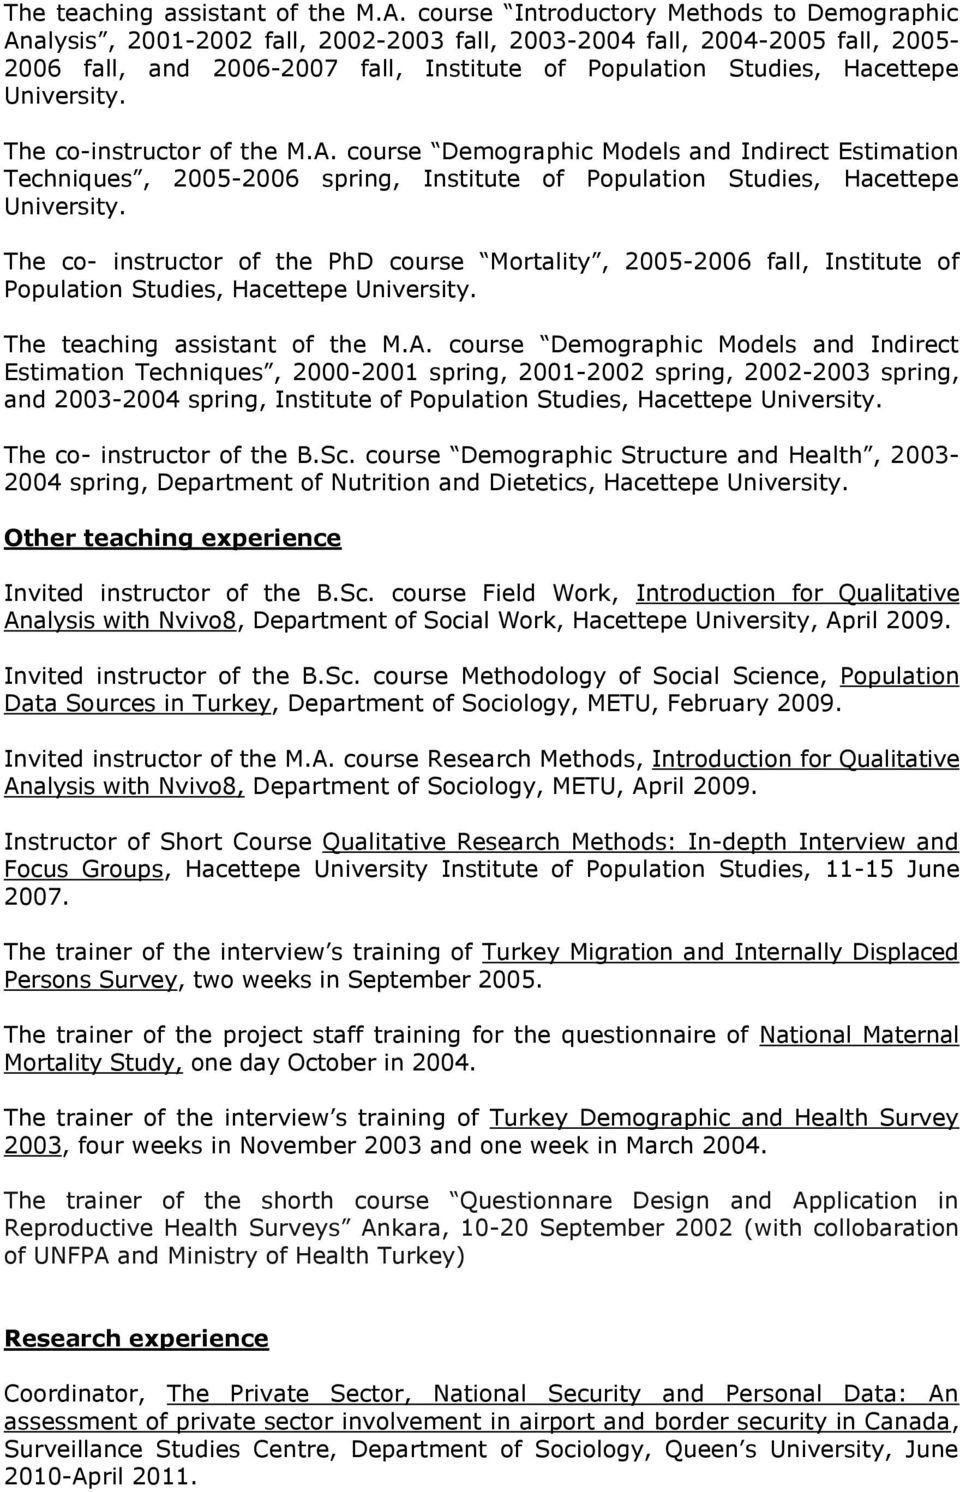 University. The co-instructor of the M.A. course Demographic Models and Indirect Estimation Techniques, 2005-2006 spring, Institute of Population Studies, Hacettepe University.